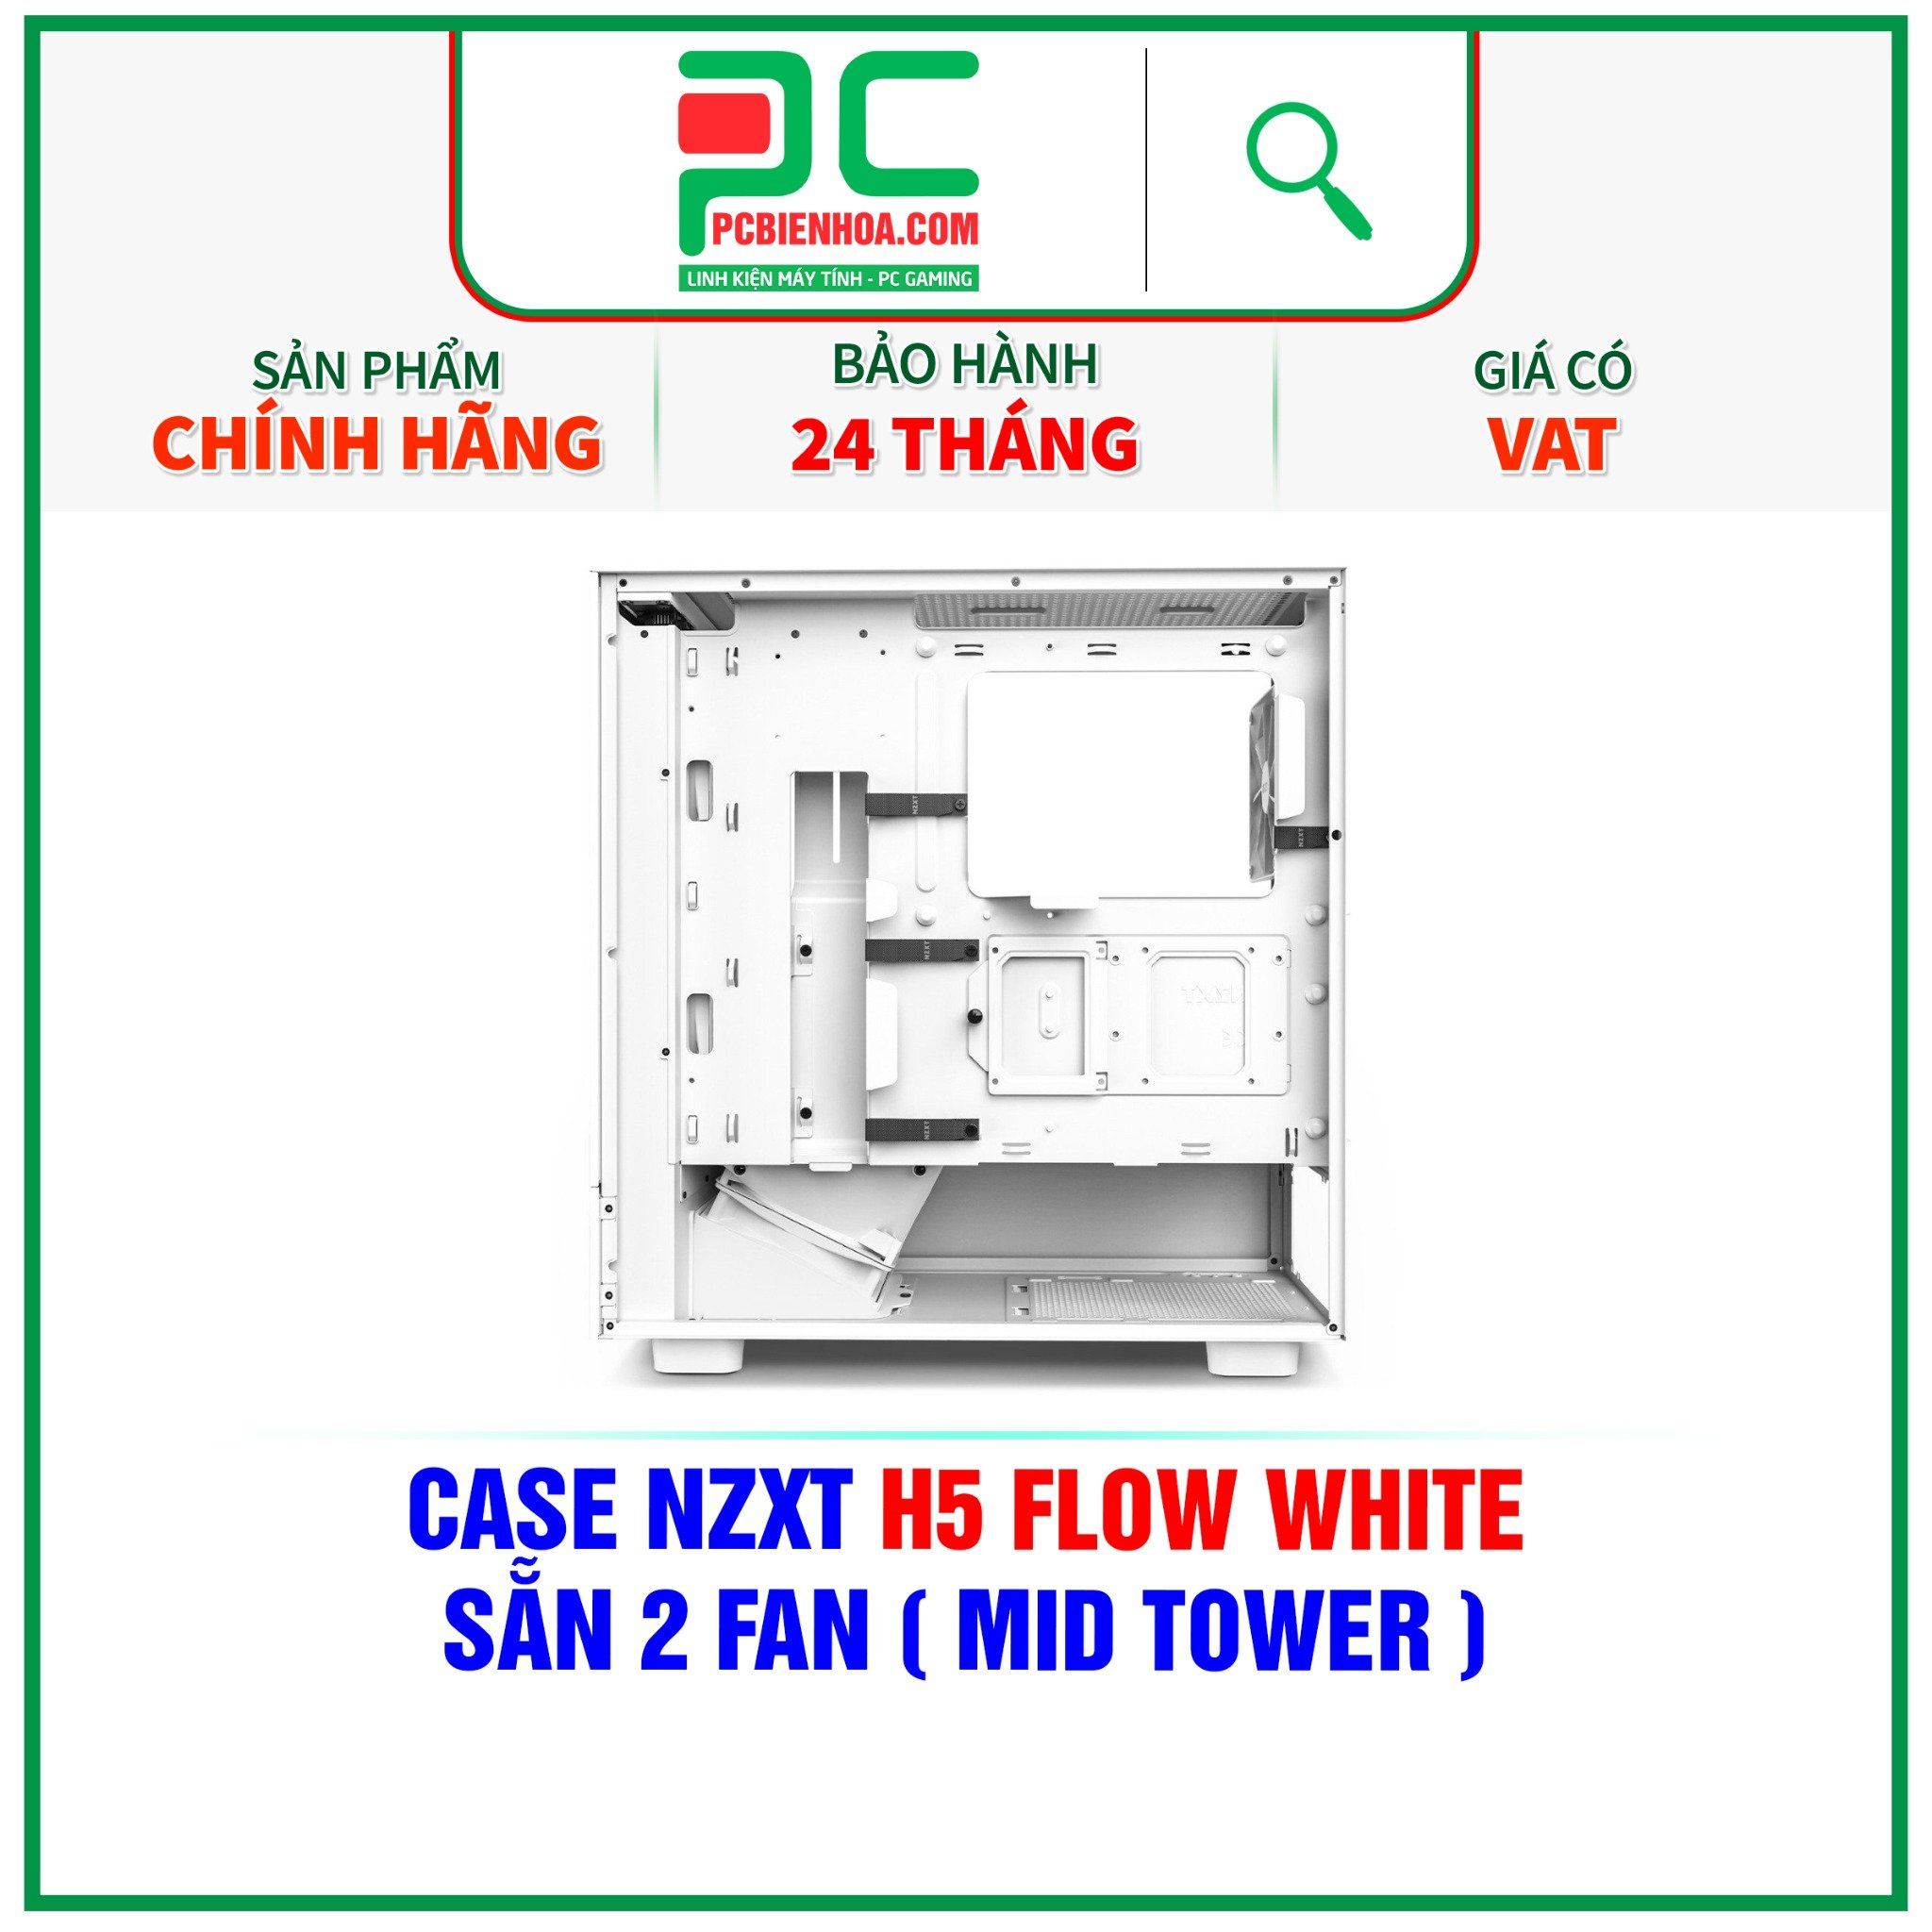  CASE NZXT H5 FLOW WHITE - SẴN 2 FAN ( MID TOWER ) 